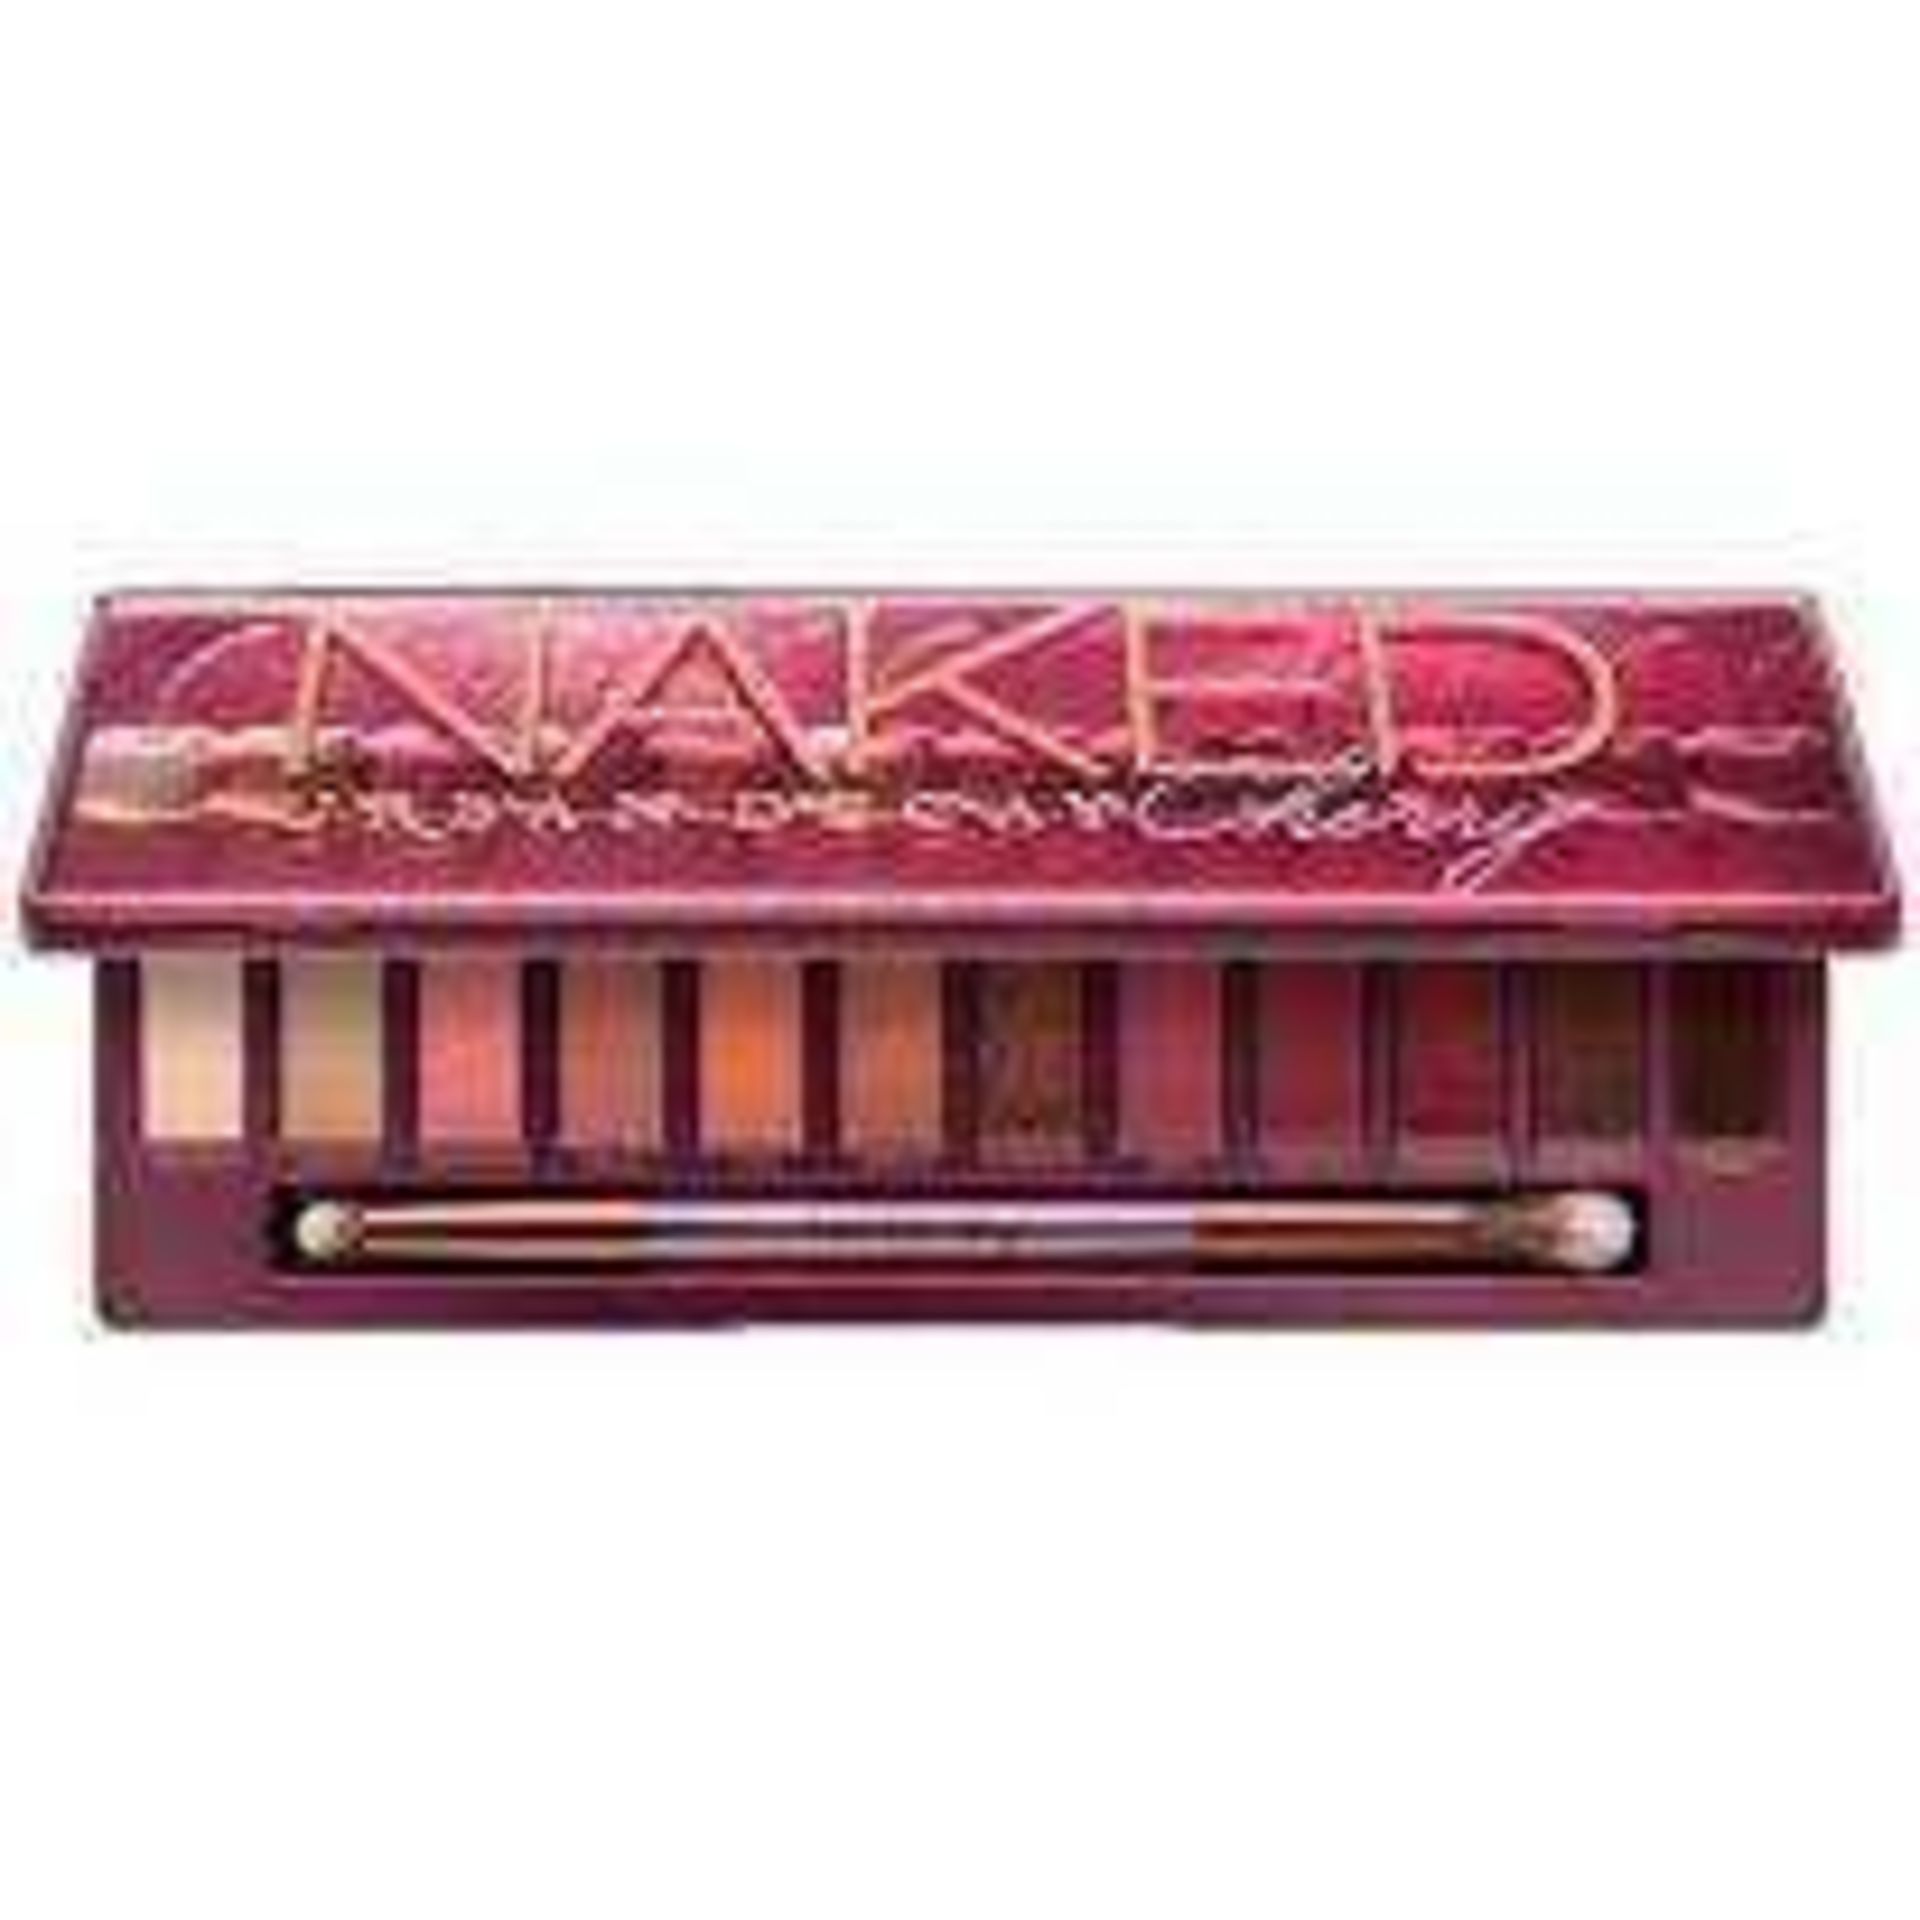 RRP £45 Each Boxed Urban Decay Naked Eyeshadow Palettes (New)